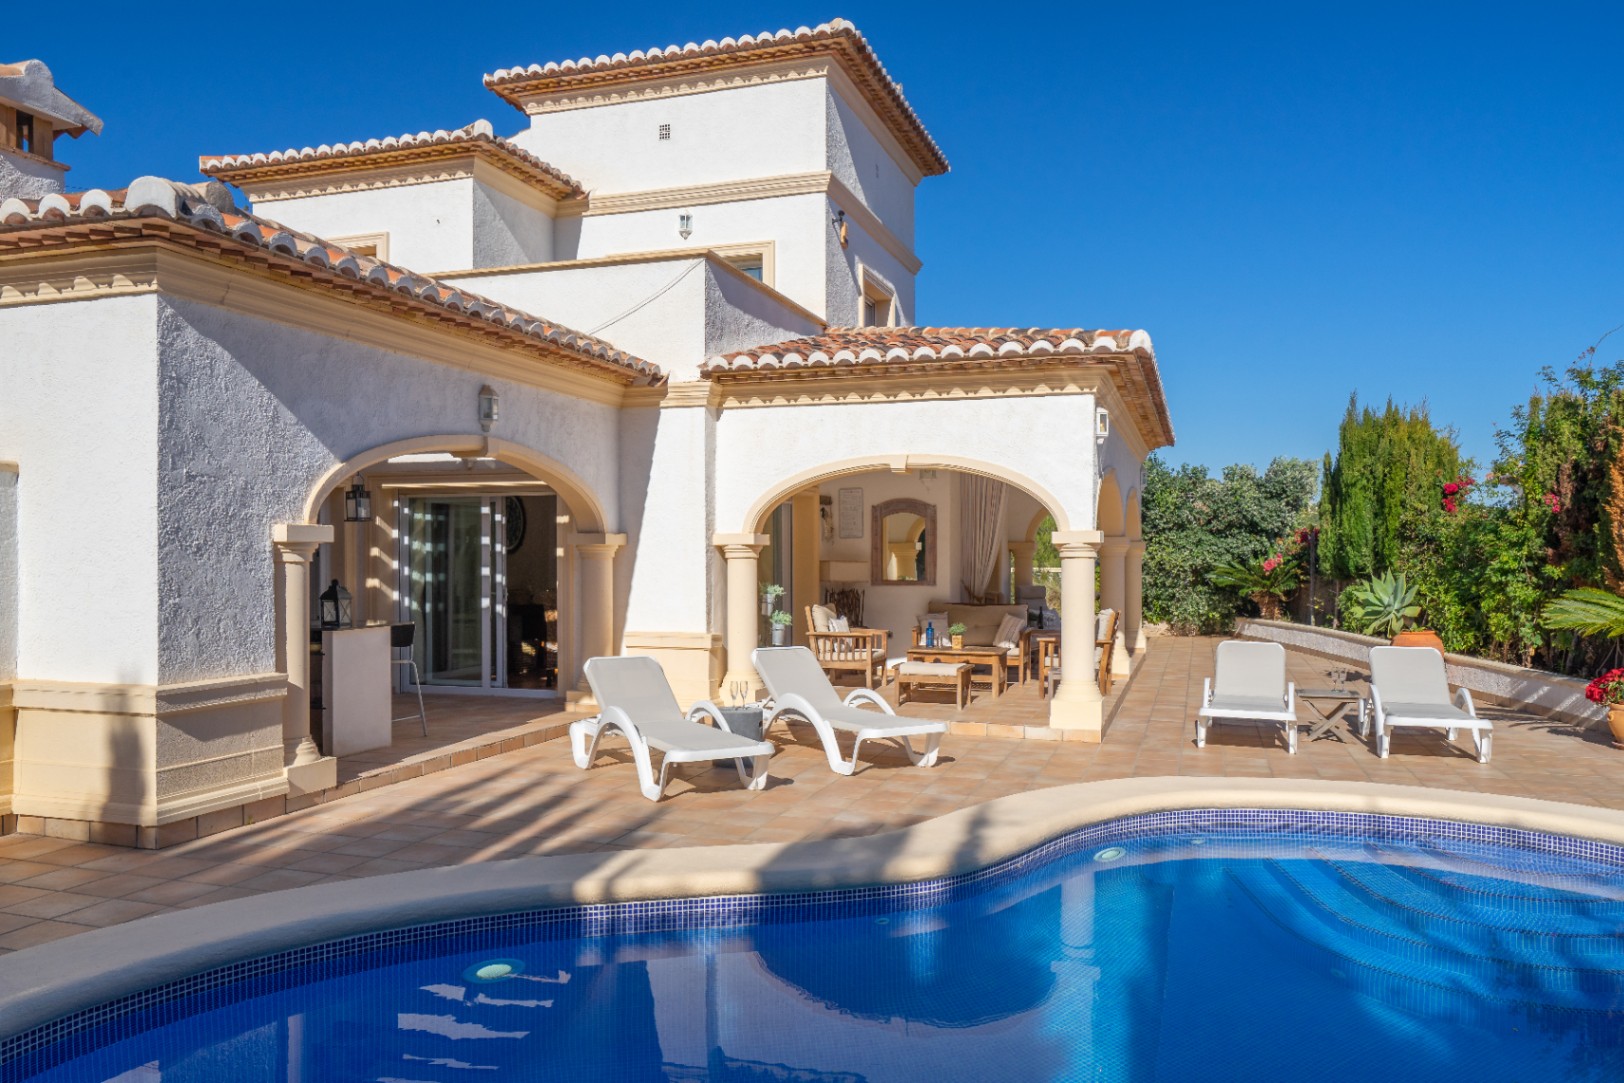 Beautiful 3 bedroom villa within a stones throw to Moraira town and beaches